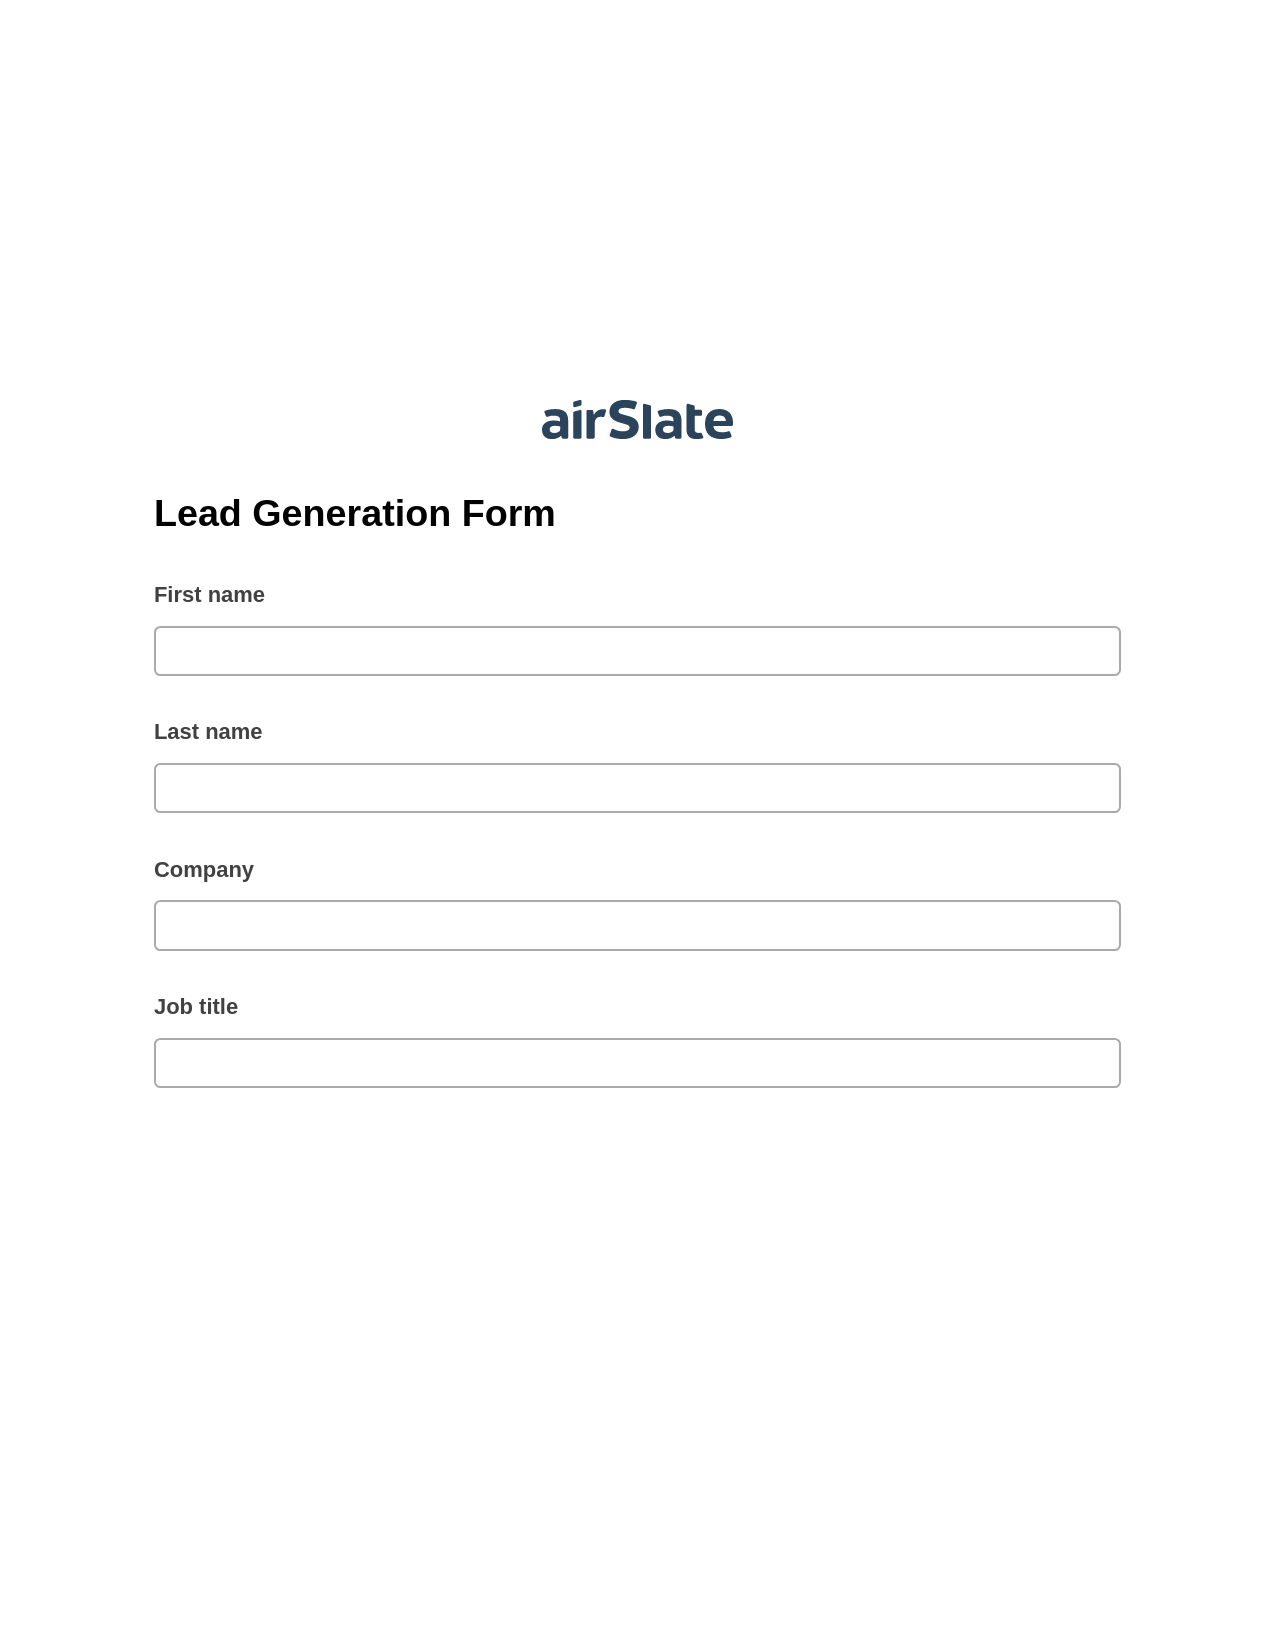 Lead Generation Form Pre-fill from CSV File Bot, Roles Reminder Bot, Email Notification Postfinish Bot